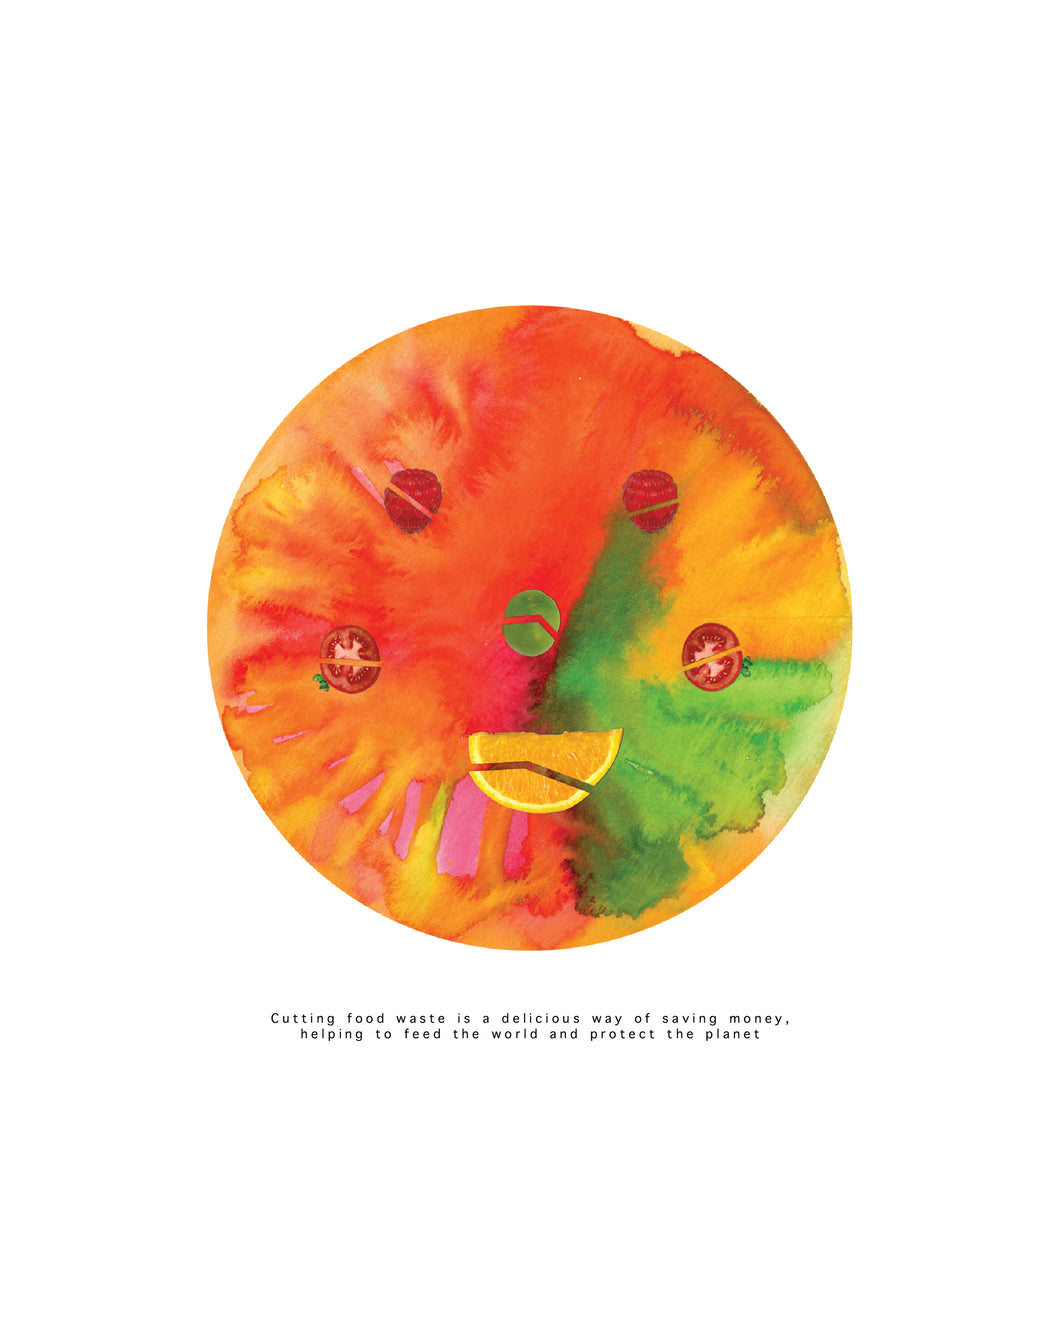 Eco-Friendly Abstract Colorful Planet Prints at Jellyque | Represents to Cut Food Waste Through Delicious Earth | Honey Yellow, Vivid Orange, Green Onion Colors Boost Immune System | Juicy-Fresh Vibes | Instant Download | Mindful Living Gift & Sustainable Life